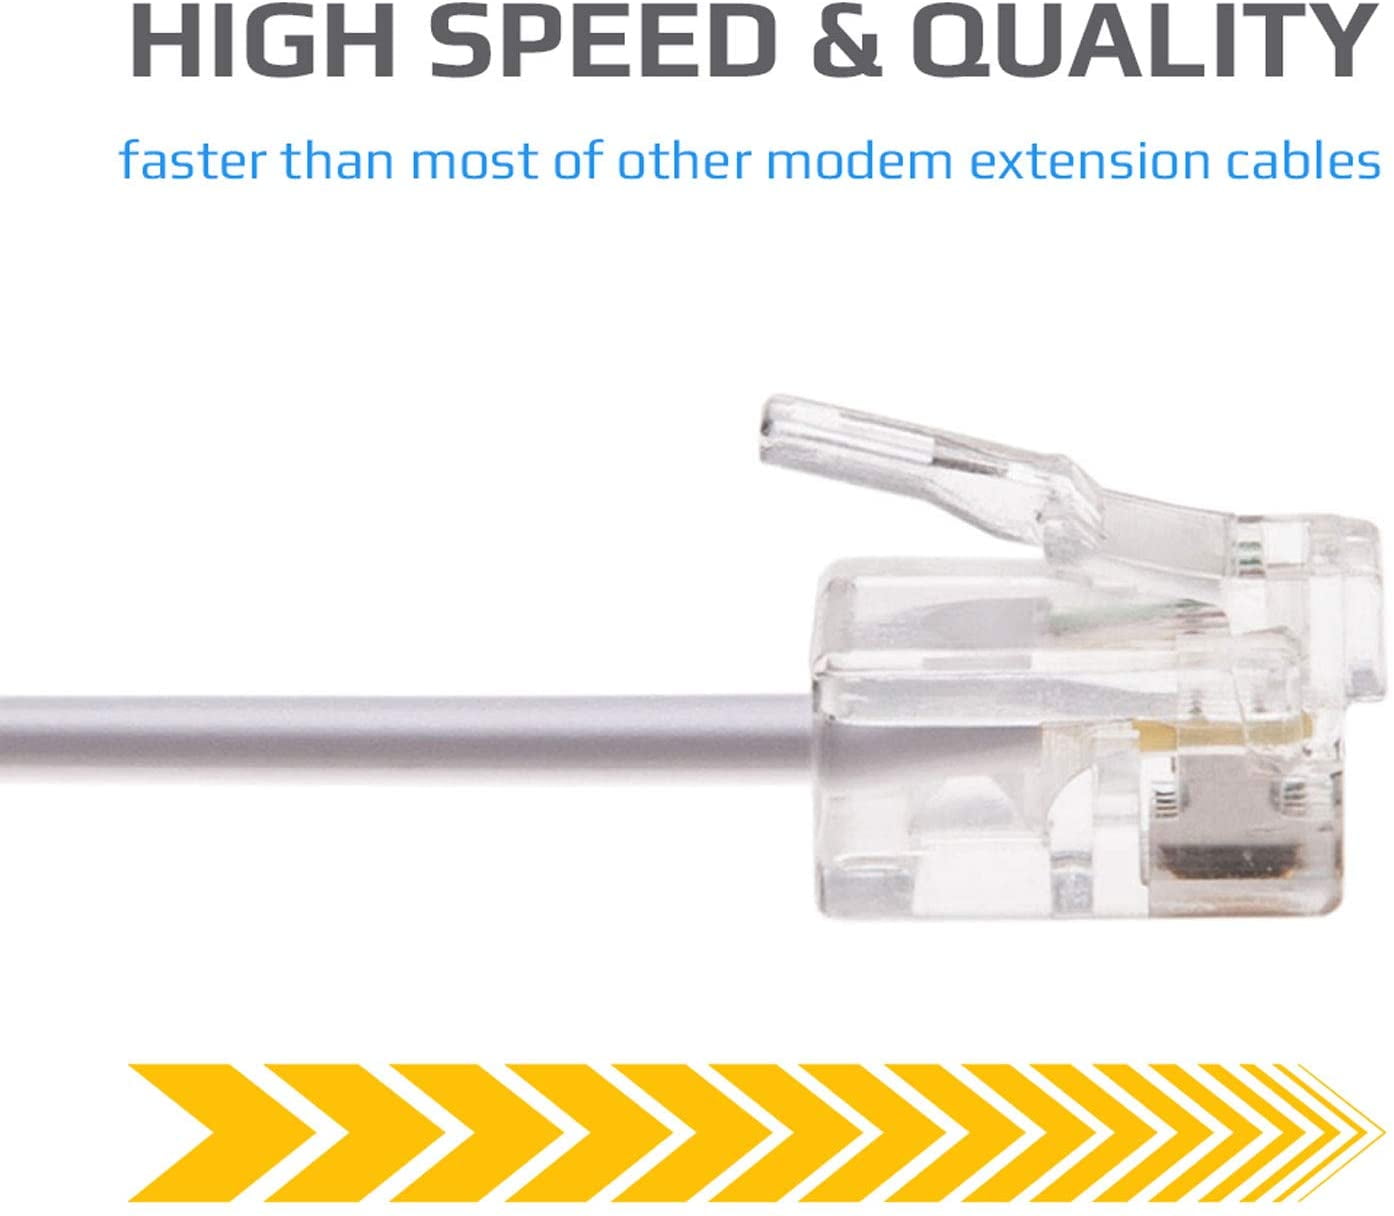 RJ11 to RJ11 High Speed Broadband Internet BT Modem/Ext Router Phone Long Cable 